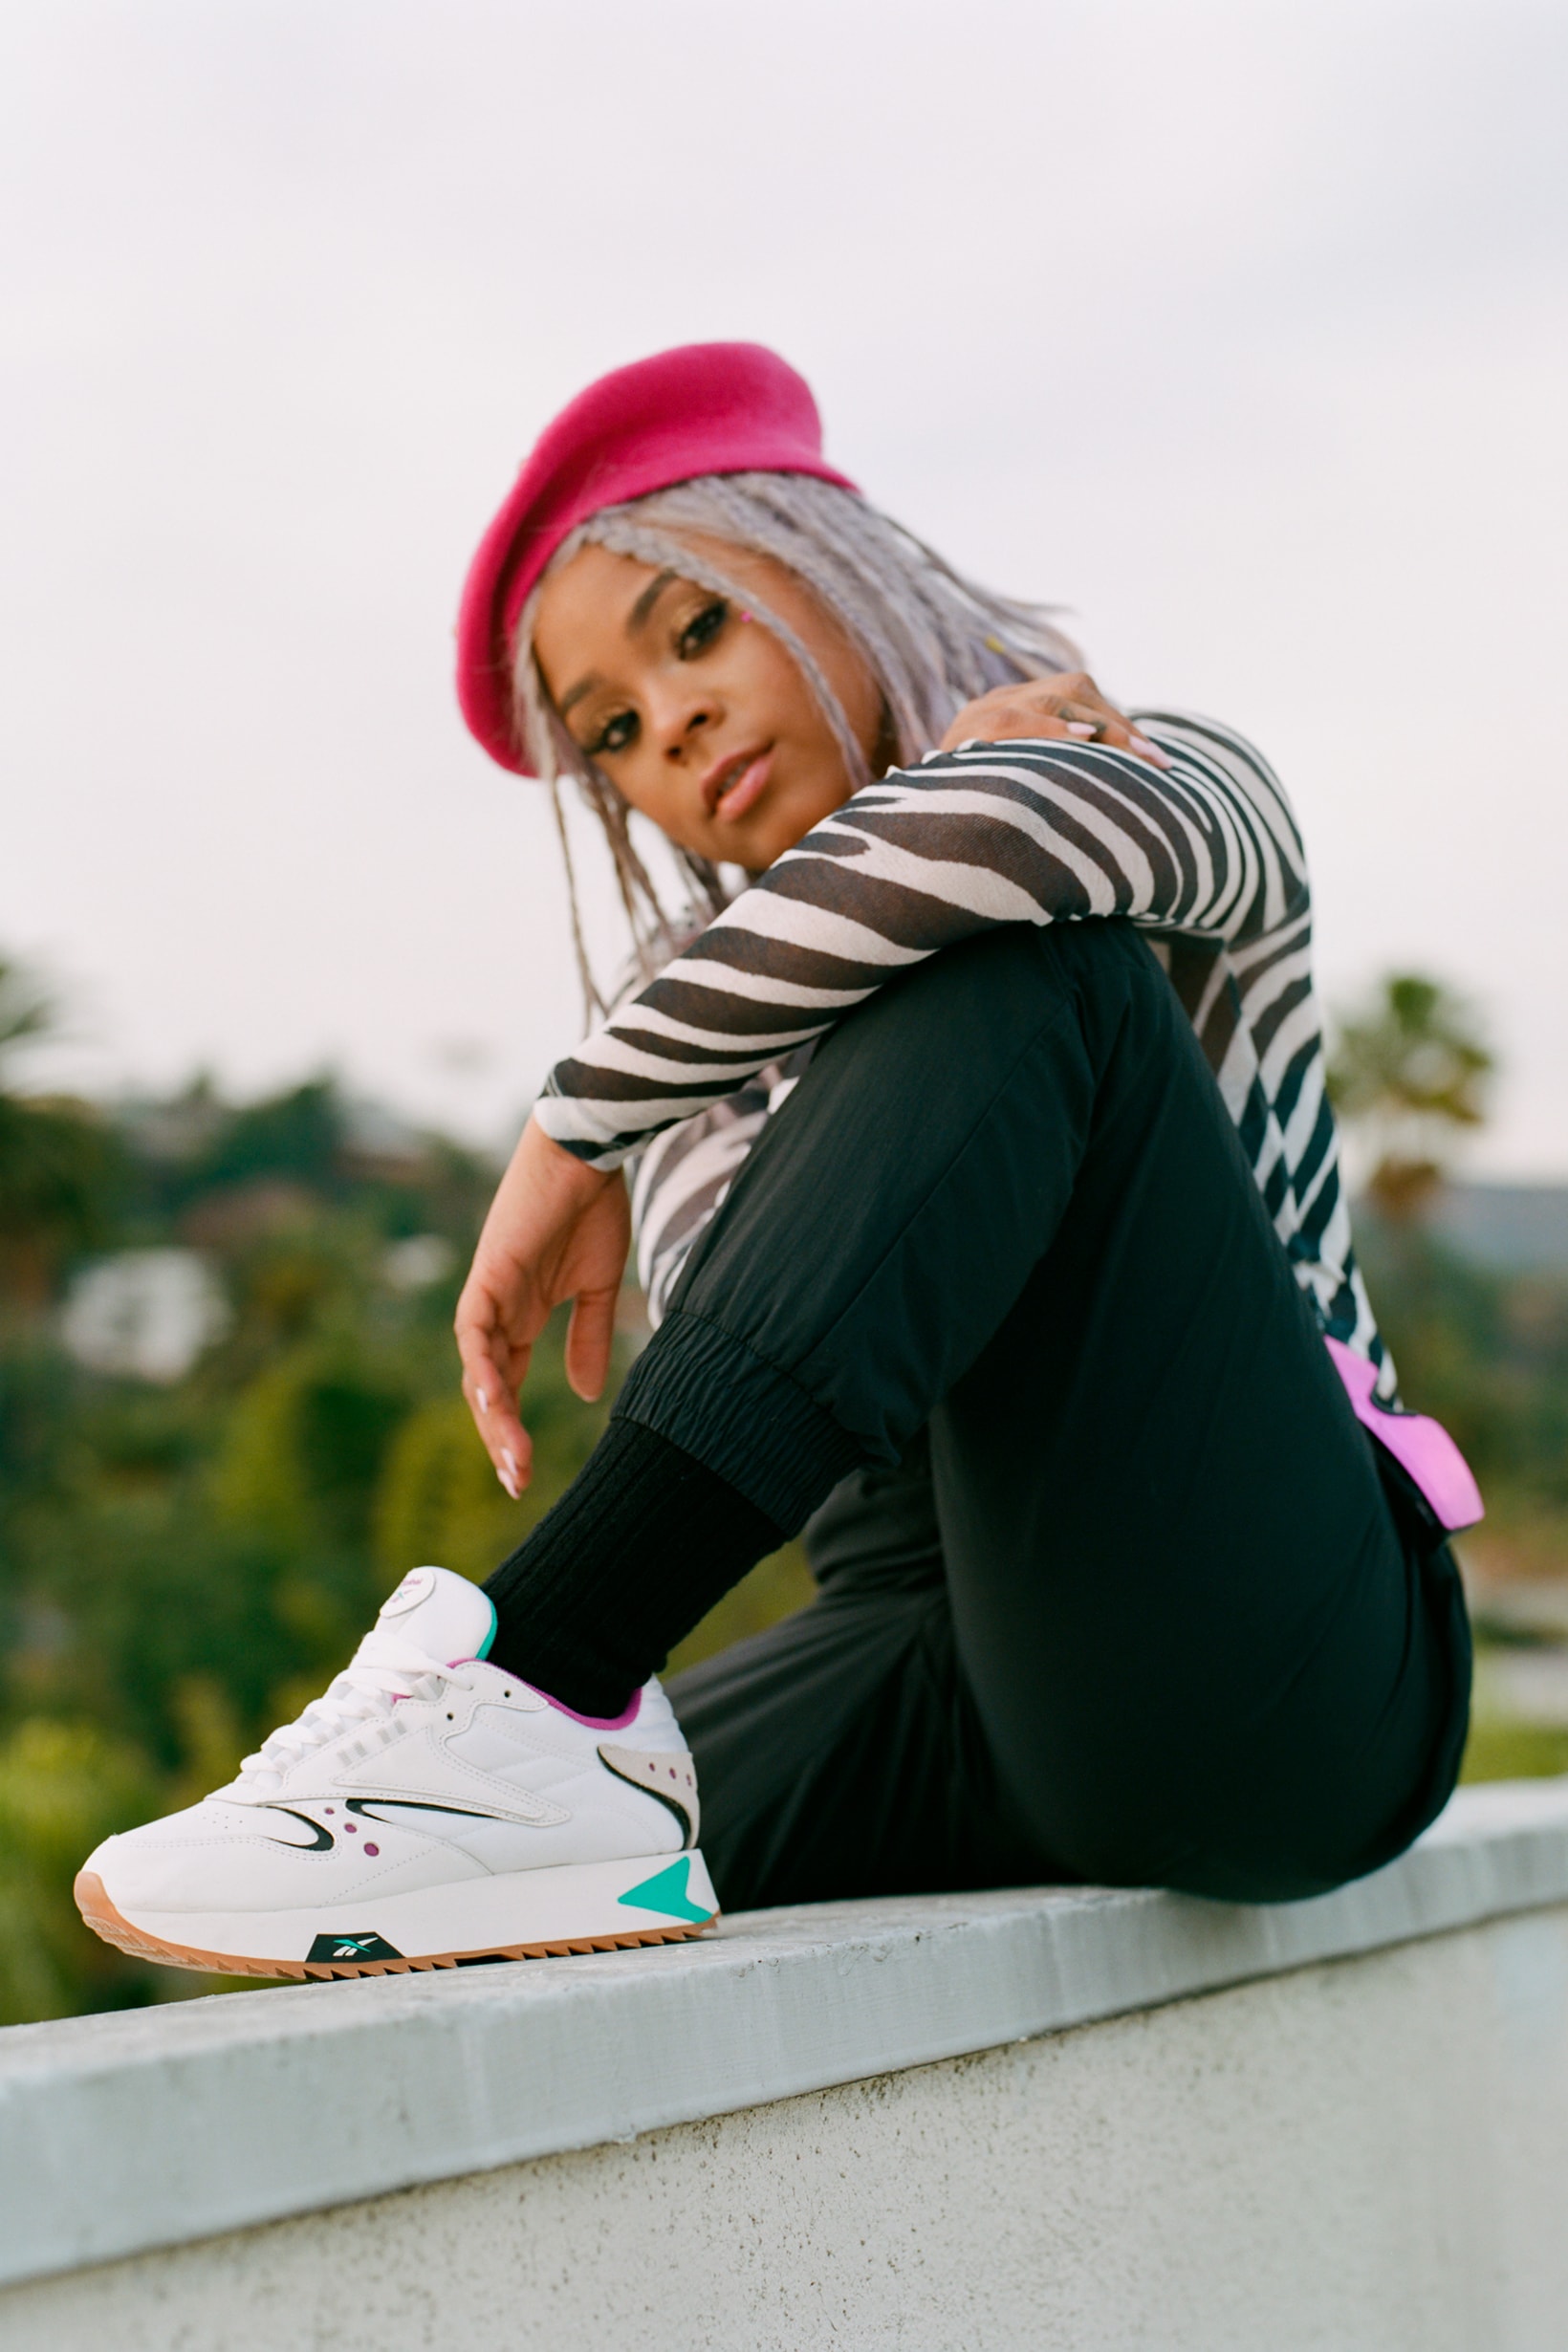 Reebok Spring Summer 2019 Alter the Icons Campaign Tayla Parx Pants Black Zebra Top White Classic Leather ATI 90s Multicolor Hat Pink